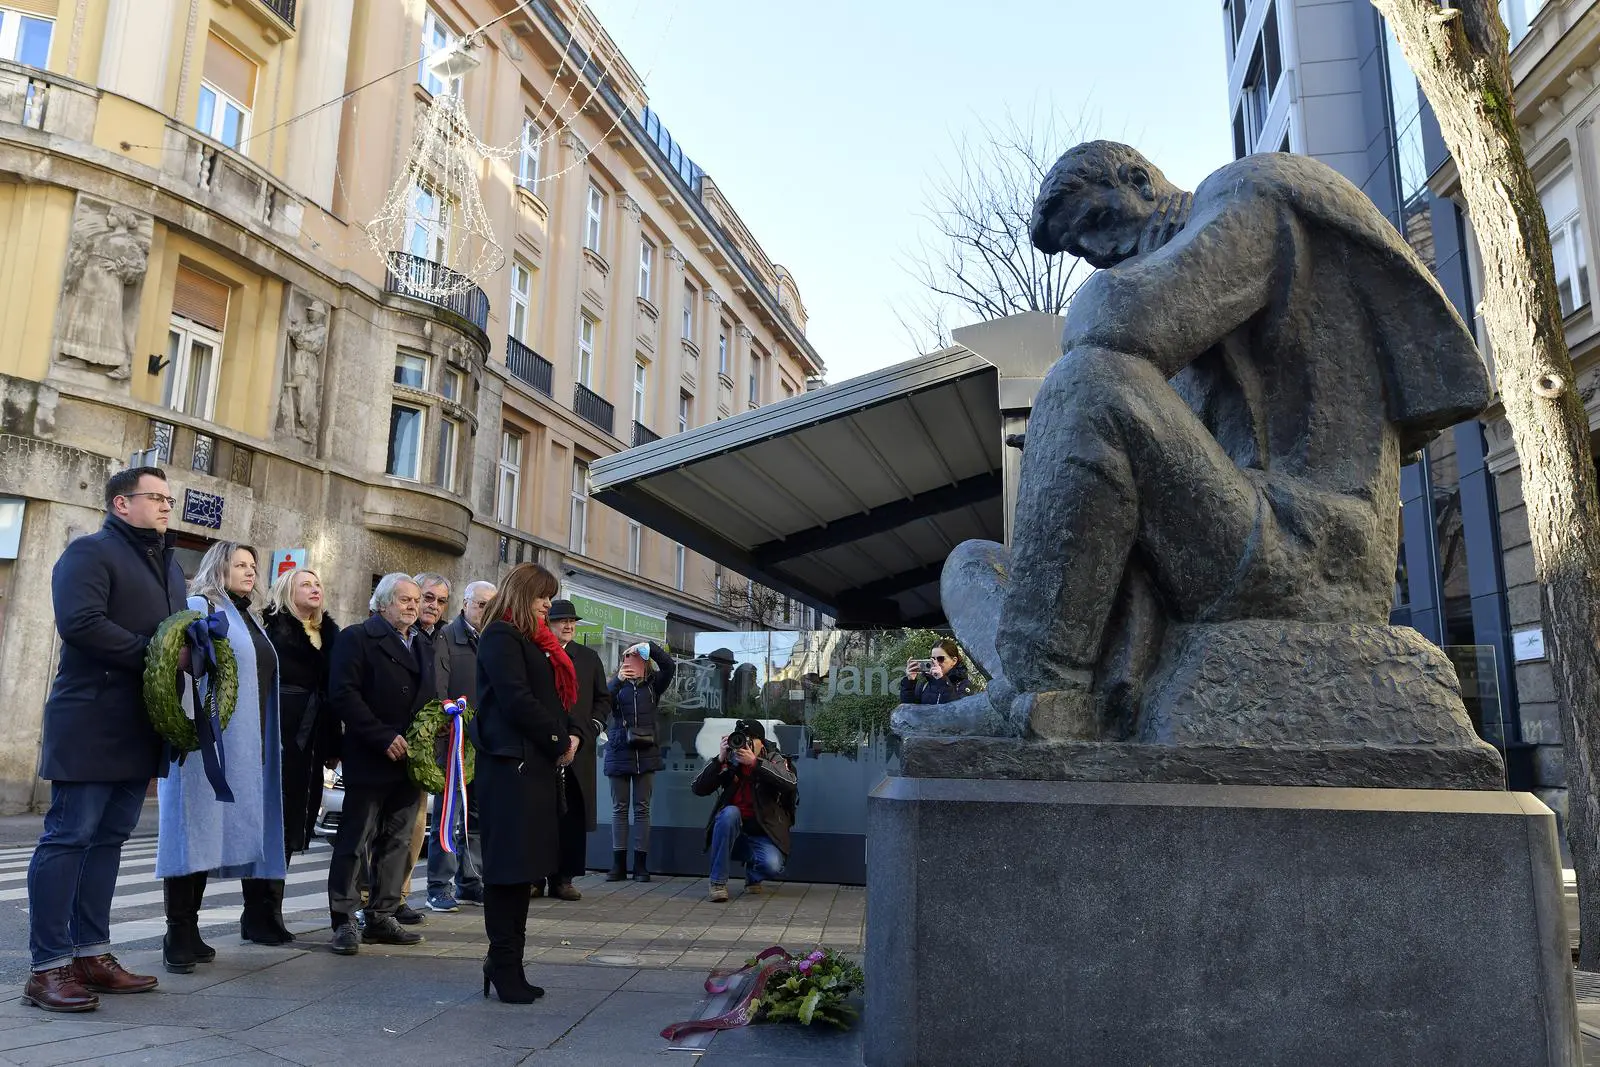 The 79th anniversary of Nikola Tesla's death was marked in Zagreb